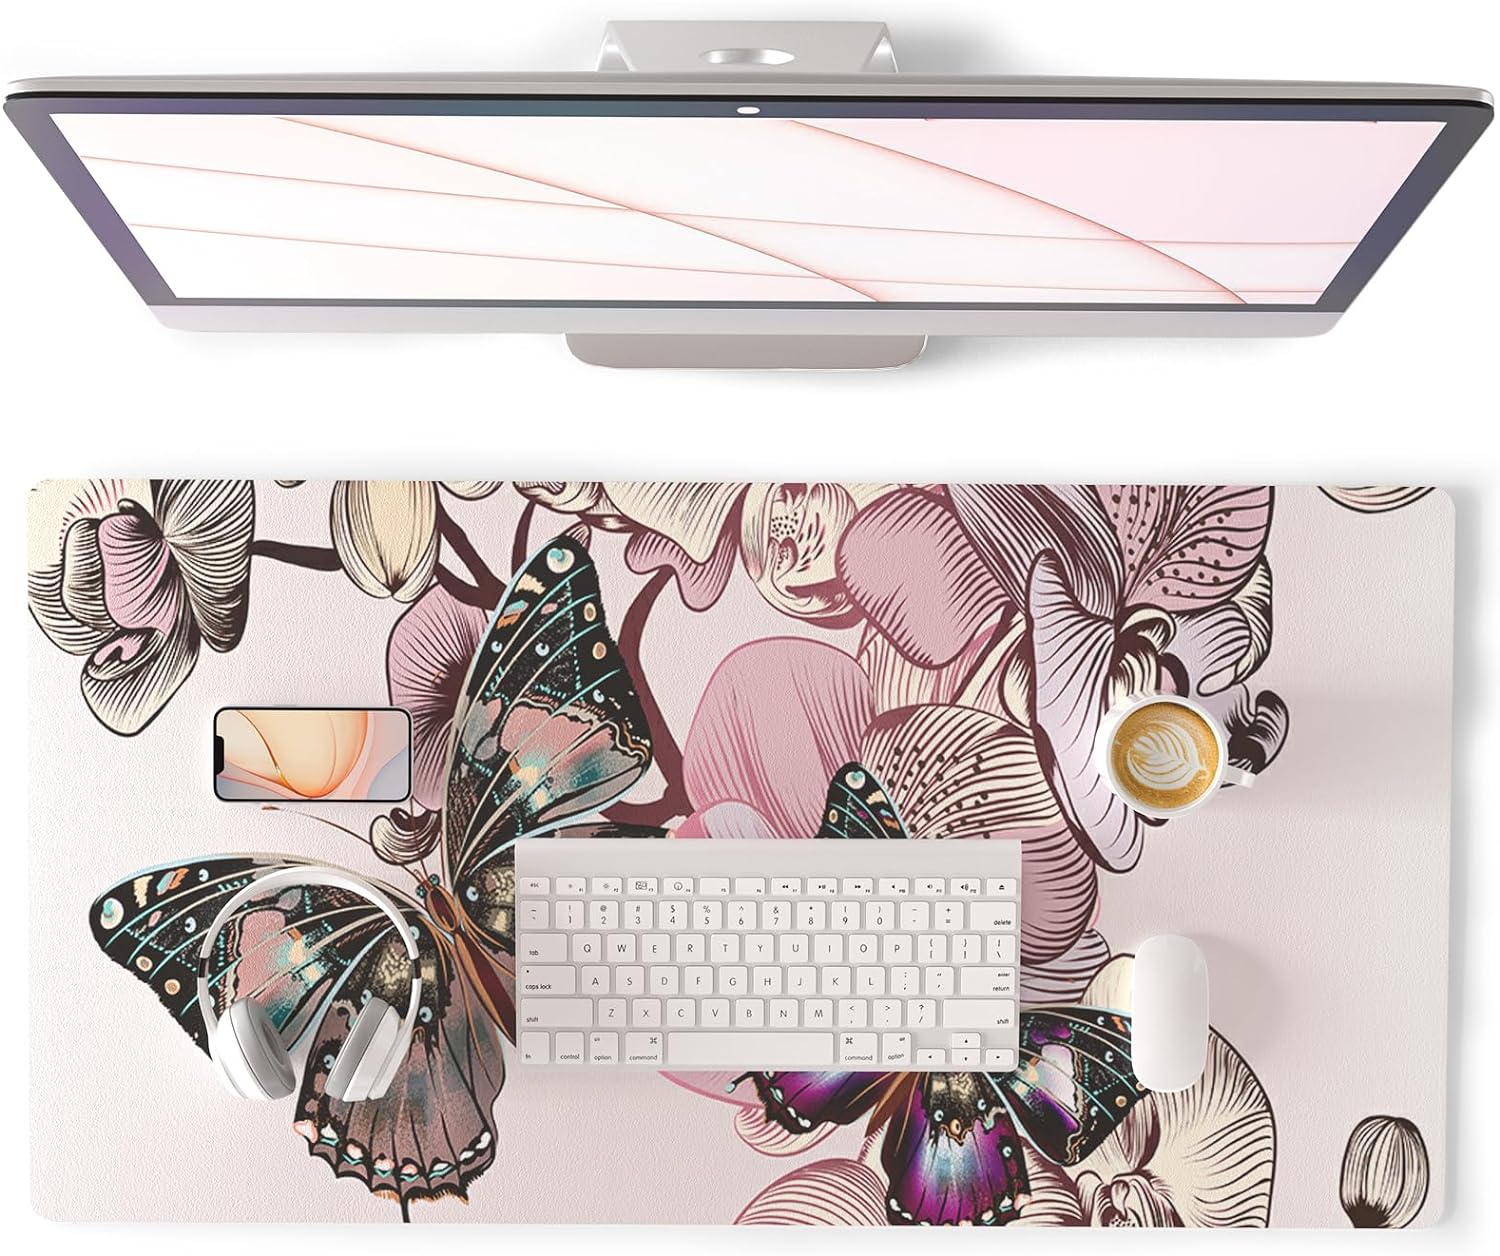 QIYI Desk Pad, PU Leather Desk Blotter Protector, Waterproof Computer Desk Mat, Keyboard Mouse Pads, Non Slip Base Home & Office Accessories, Extended Large Size 31.5 x 15.7 - Butterflies & Orchids